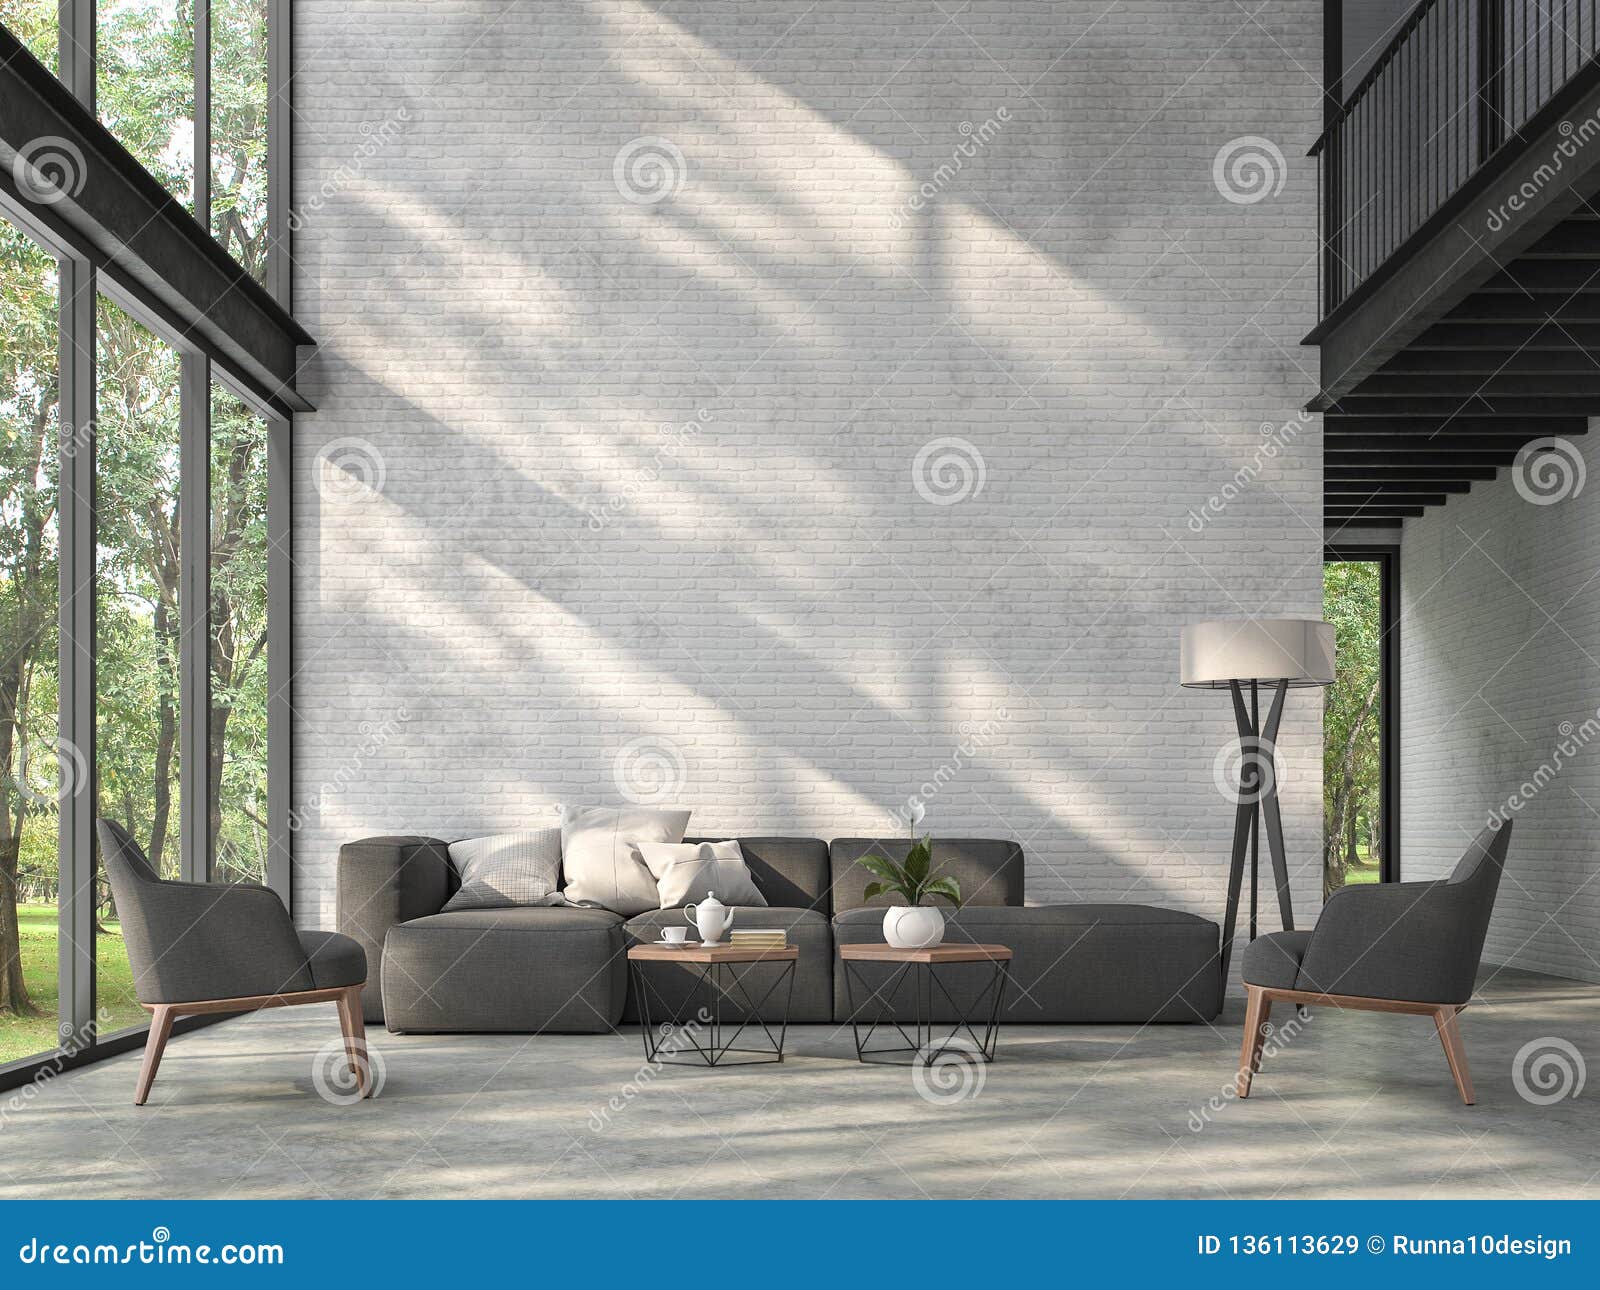 high ceiling loft living room with nature view 3d render